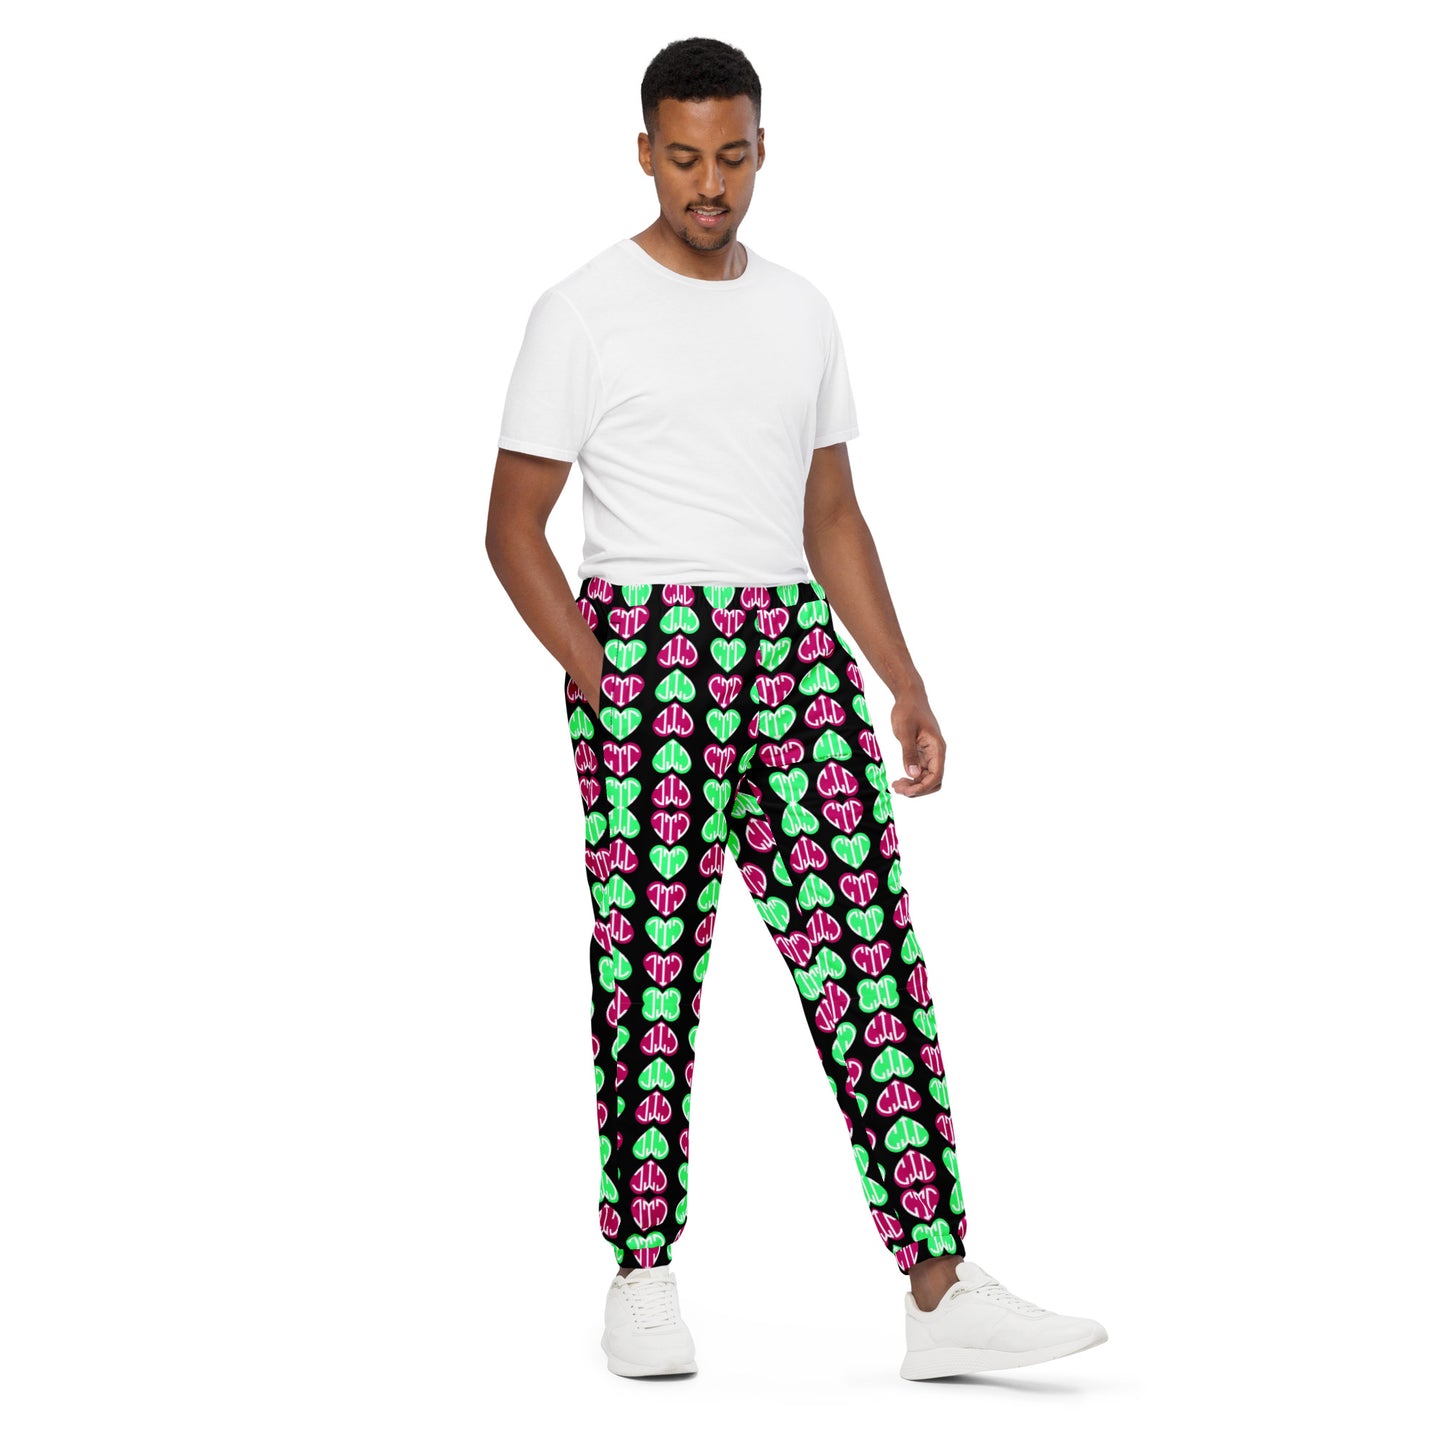 CtC Hearts All-Over track pants